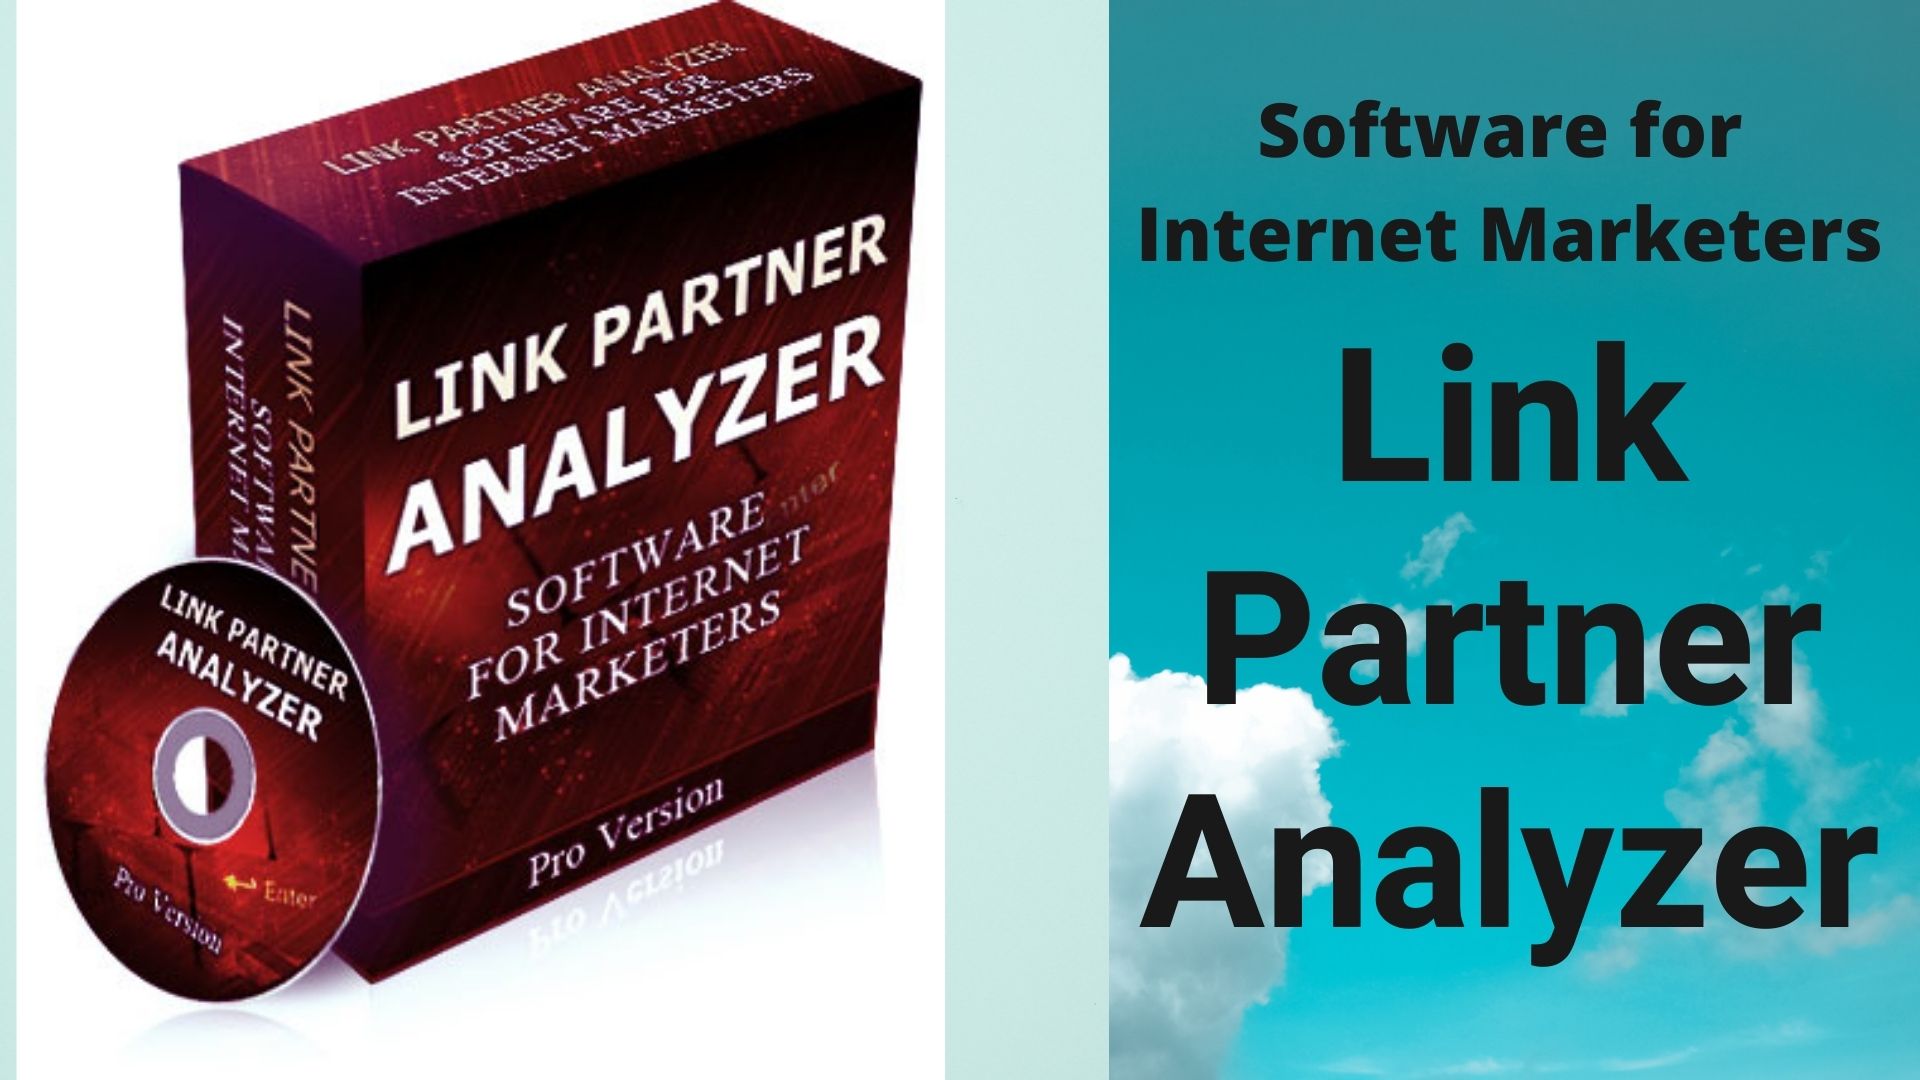 Link Partner Analyzer About to Discover the Time Saving, Profit Boosting Magic